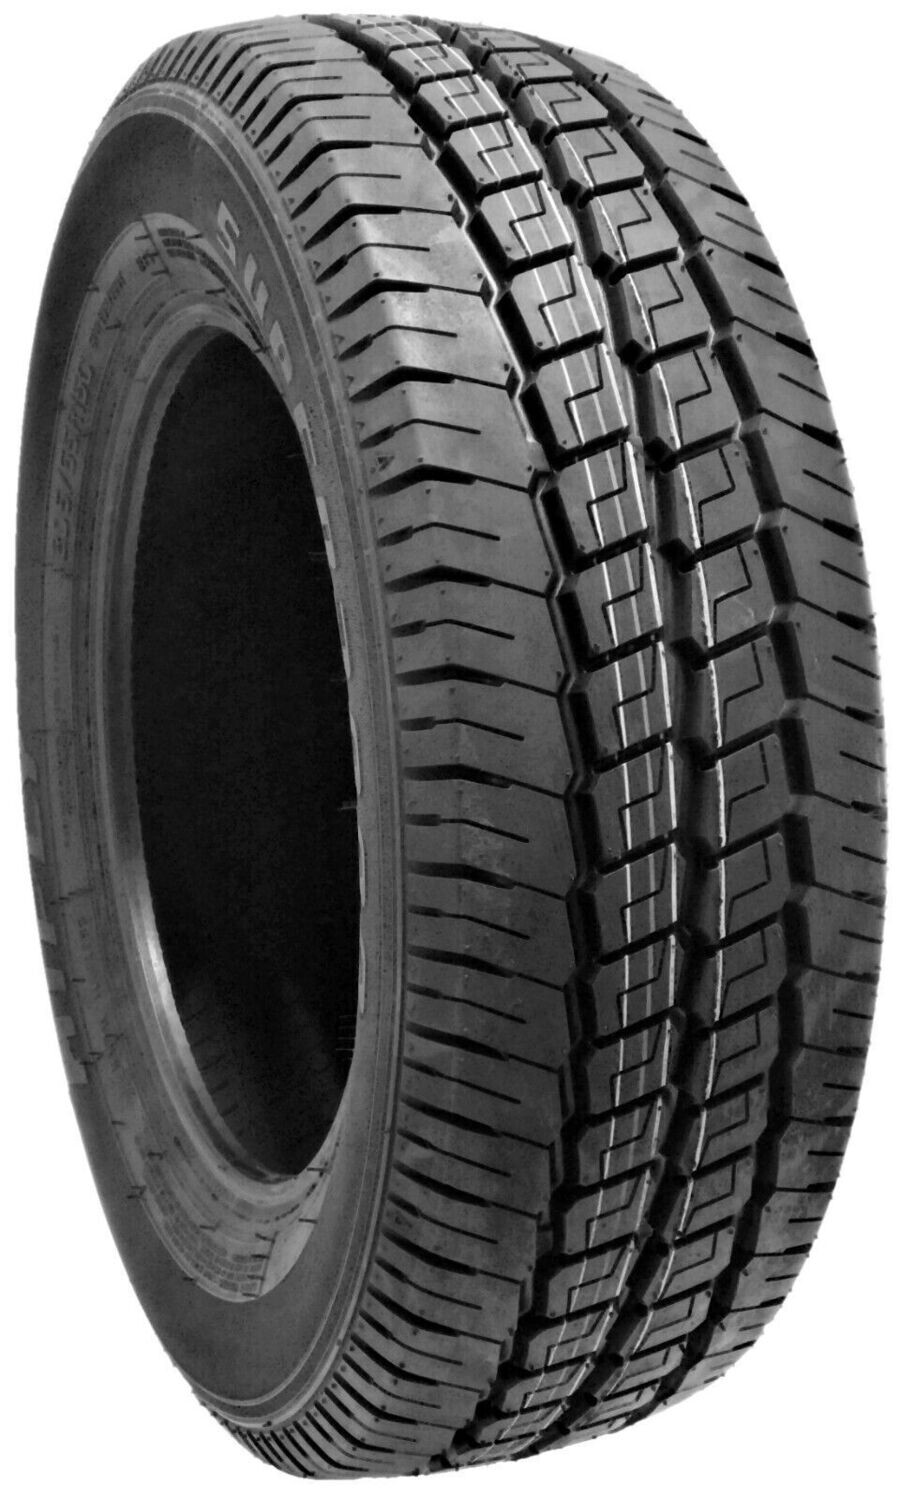 COMMERCIAL Tyre 16"